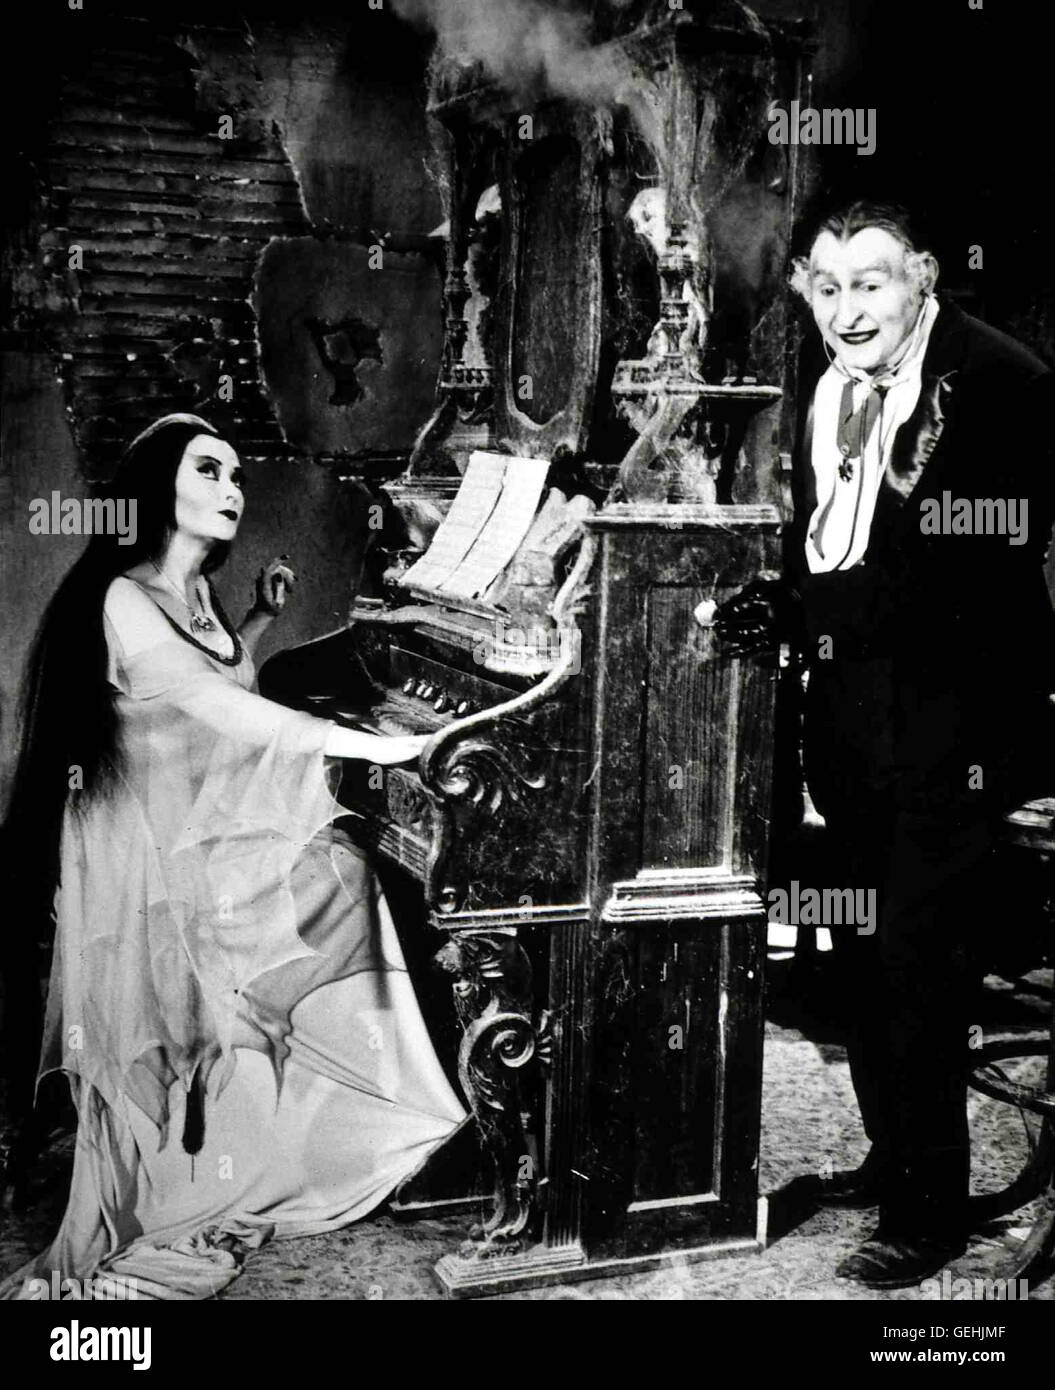 Lily Munster (Yvonne de Carlo), Opa Munster (Al Lewis) *** Local Caption *** 1964, Munsters, The, The Munsters Stock Photo